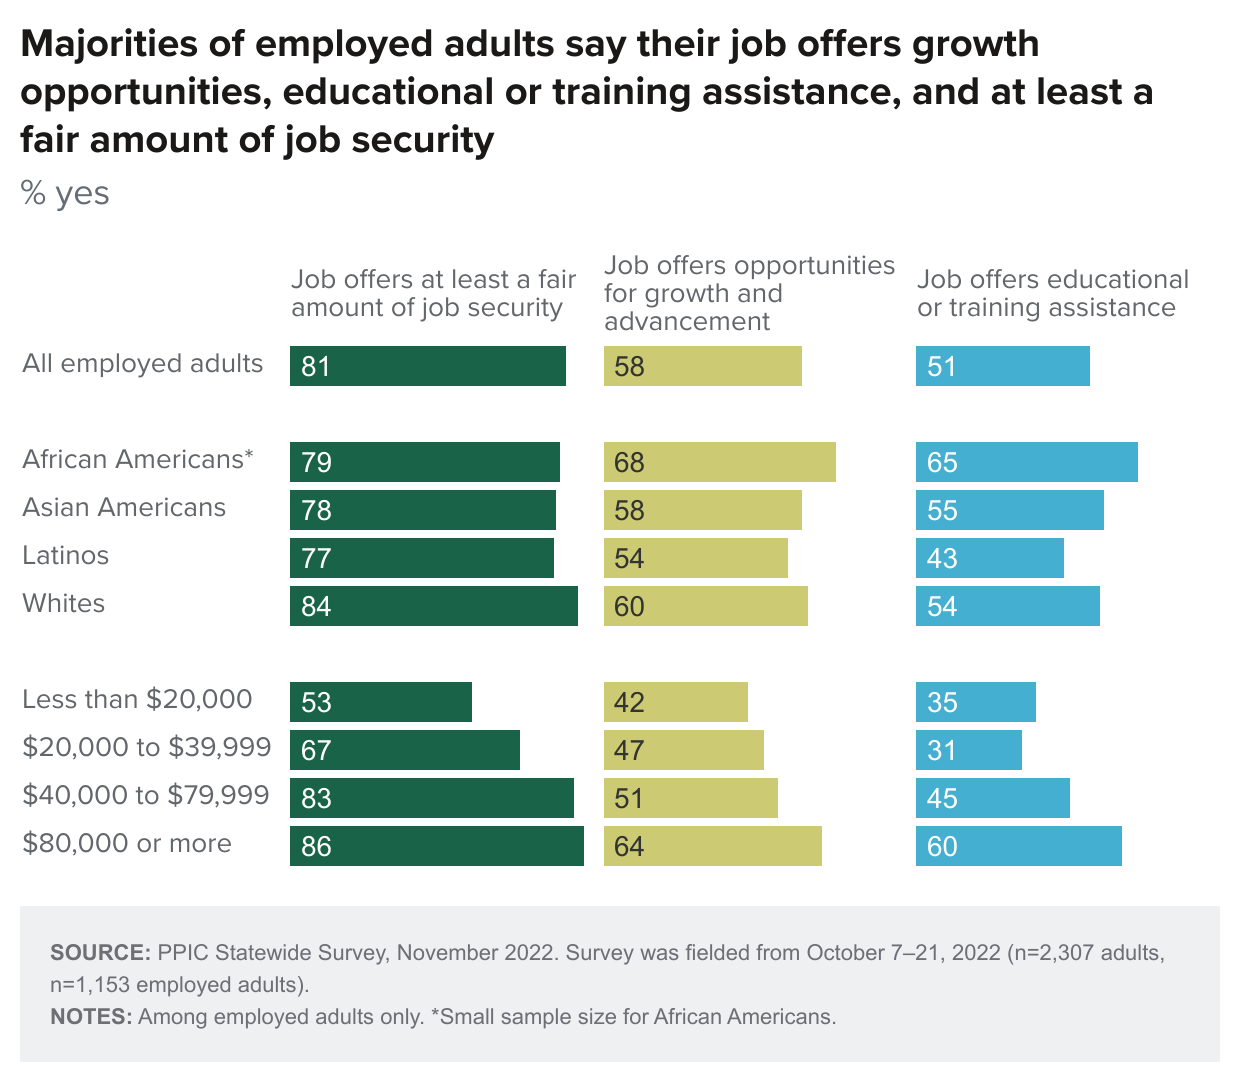 figure - Majorities of employed adults say their job offers growth opportunities, educational or training assistance, and at least a fair amount of job security